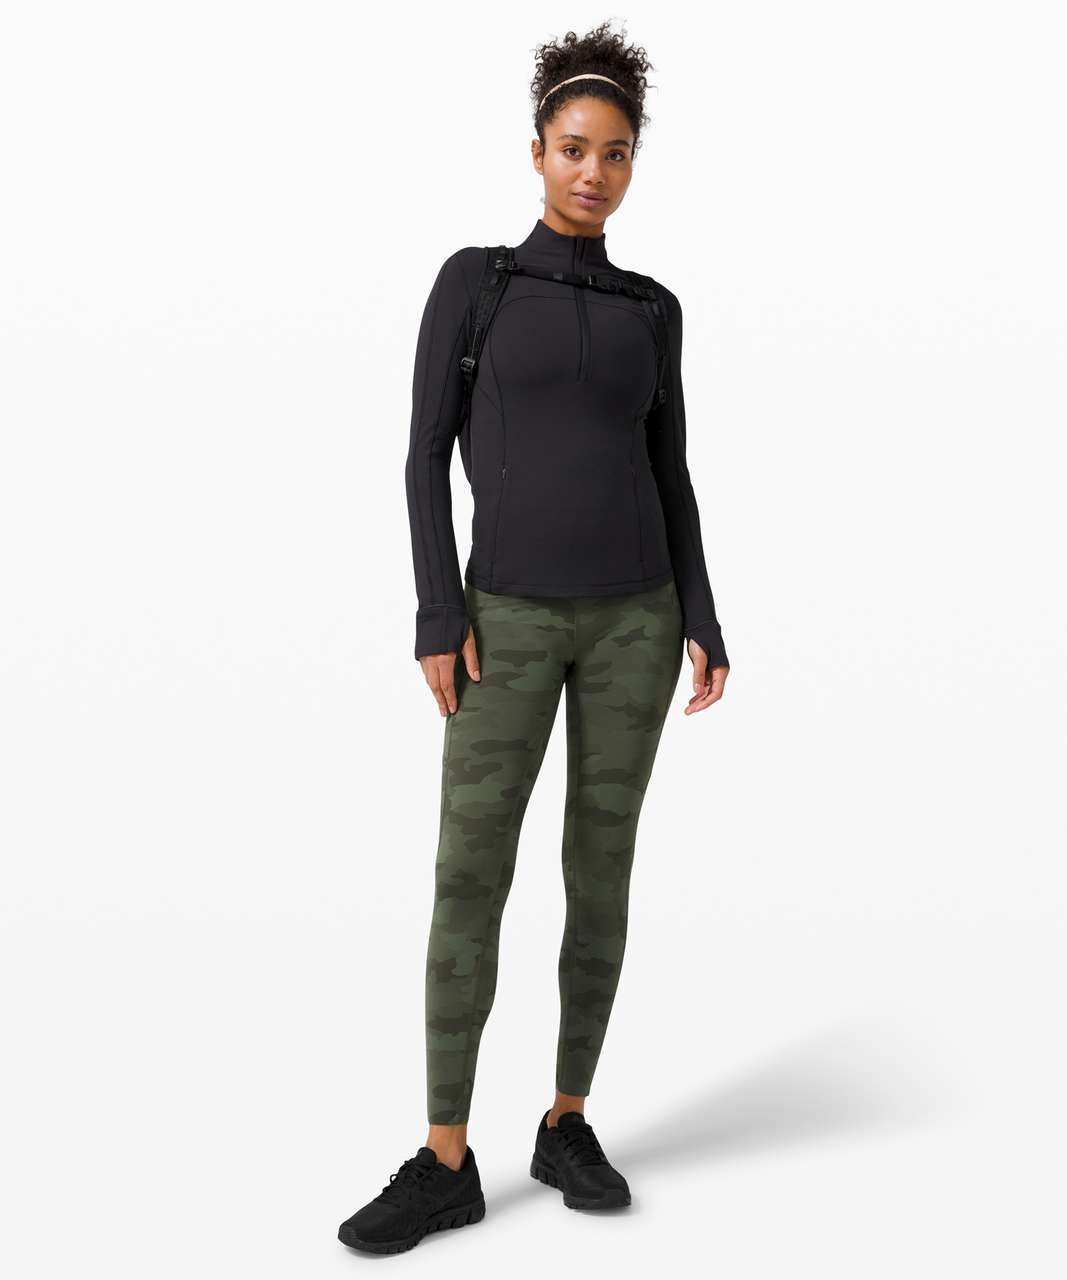 Lululemon Fast and Free High-Rise Tight 28" *Non-Reflective Brushed Nulux - Heritage 365 Camo Green Twill Multi